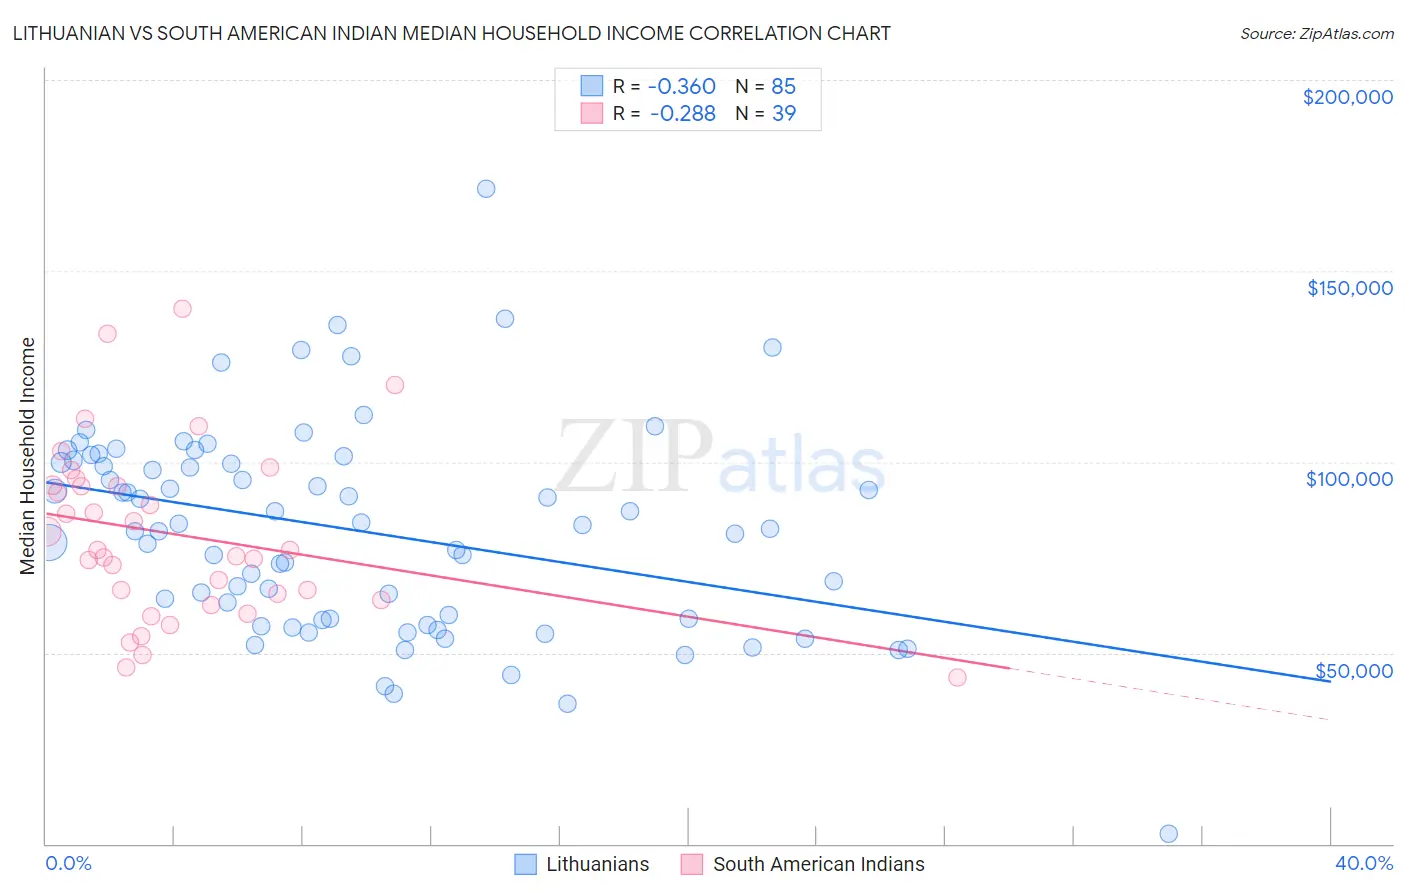 Lithuanian vs South American Indian Median Household Income